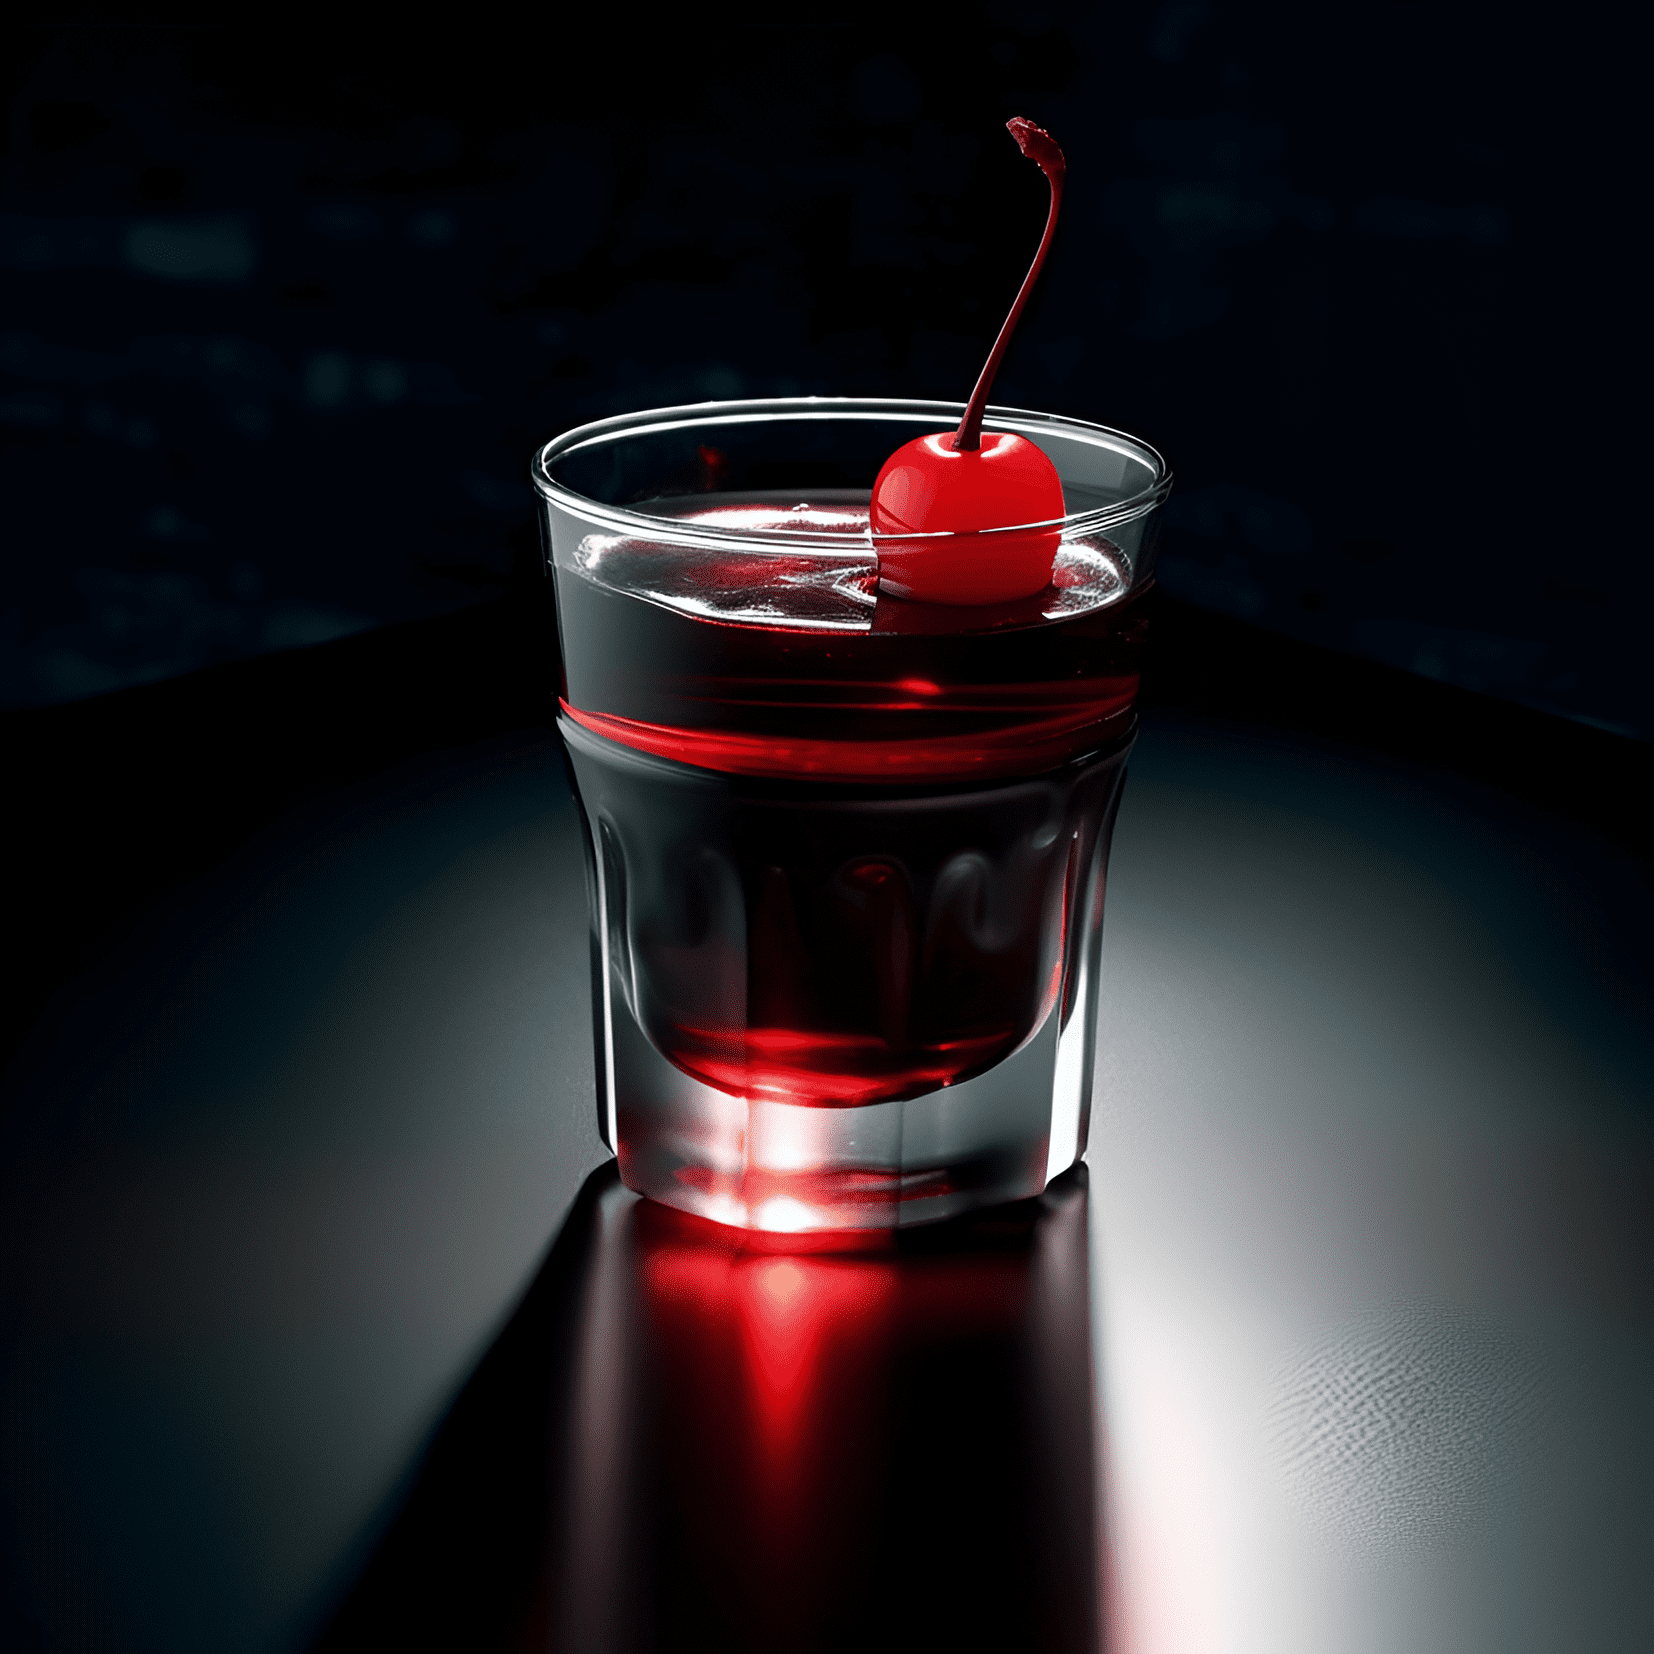 Shot in the Dark Cocktail Recipe - The Shot in the Dark has a complex and intriguing taste profile, with a combination of sweet, sour, and bitter notes. The drink is strong and bold, yet smooth and velvety on the palate. The flavors are perfectly balanced, creating a harmonious and unforgettable experience.